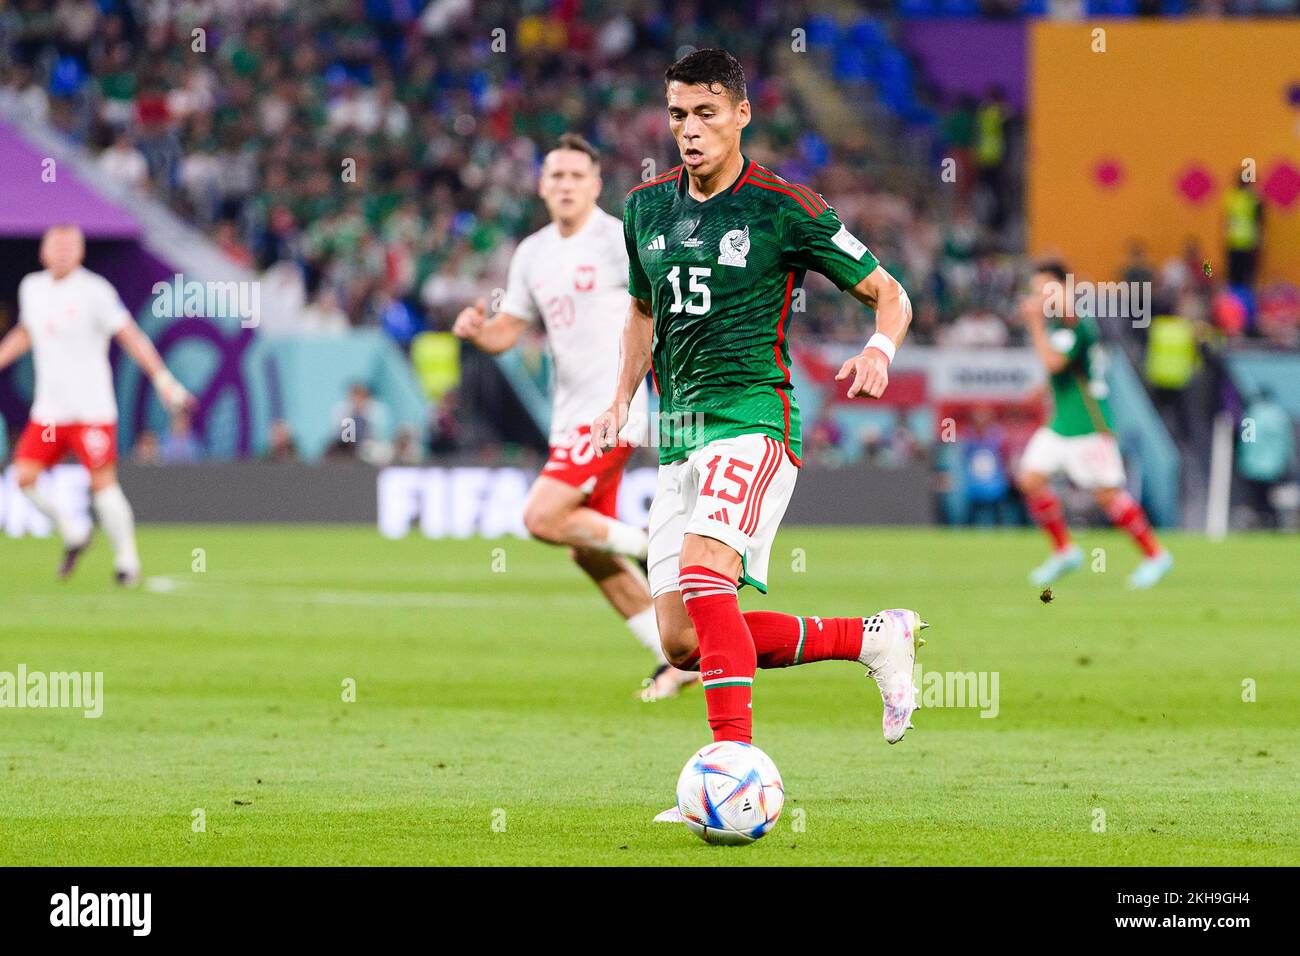 Doha, Qatar. 22nd Nov, 2022. Estadio 974 Hector Moreno of Mexico during a match between Mexico and Poland, valid for the group stage of the World Cup, held at Estadio 974 in Doha, Qatar. (Marcio Machado/SPP) Credit: SPP Sport Press Photo. /Alamy Live News Stock Photo